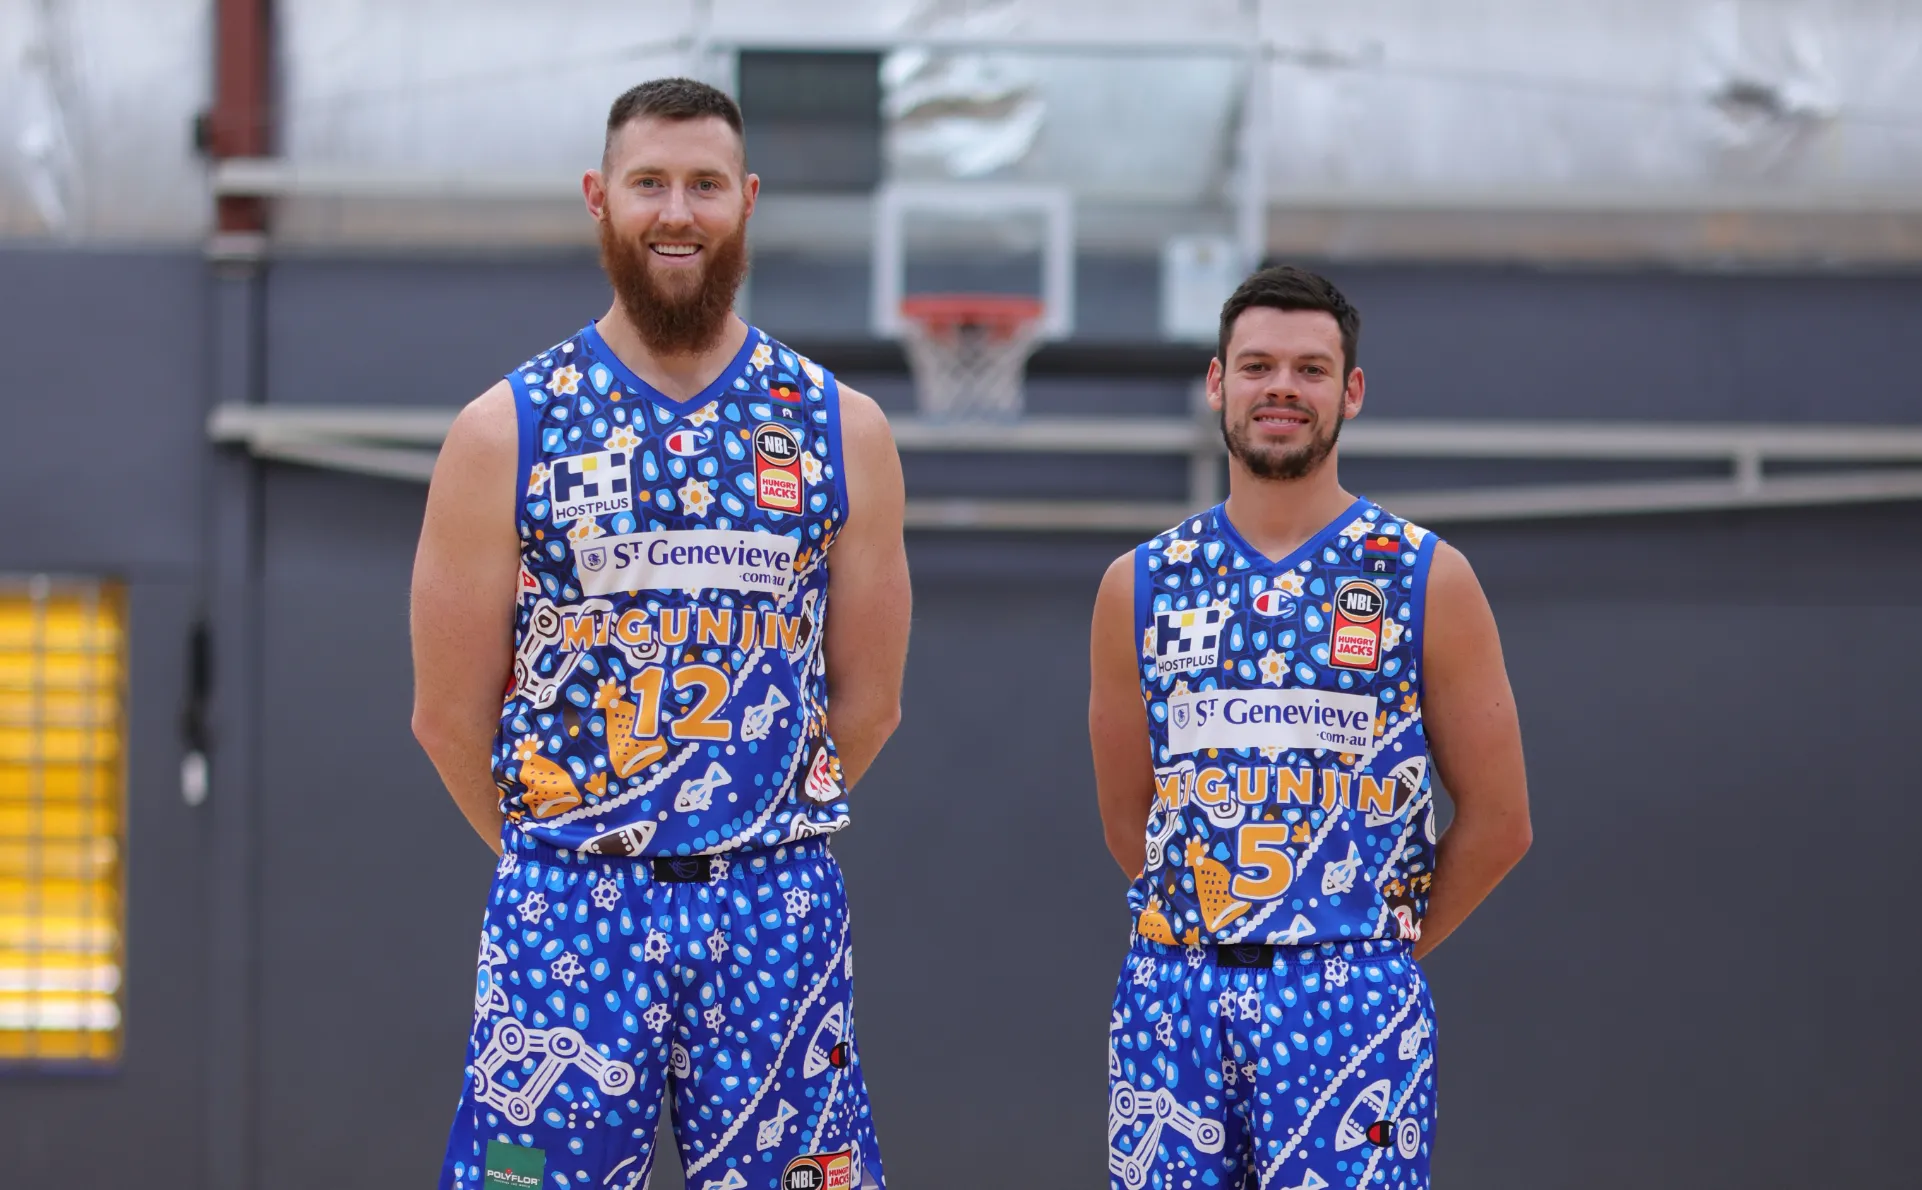 NBL 2022: Every club's Indigenous jersey and the meanings behind them